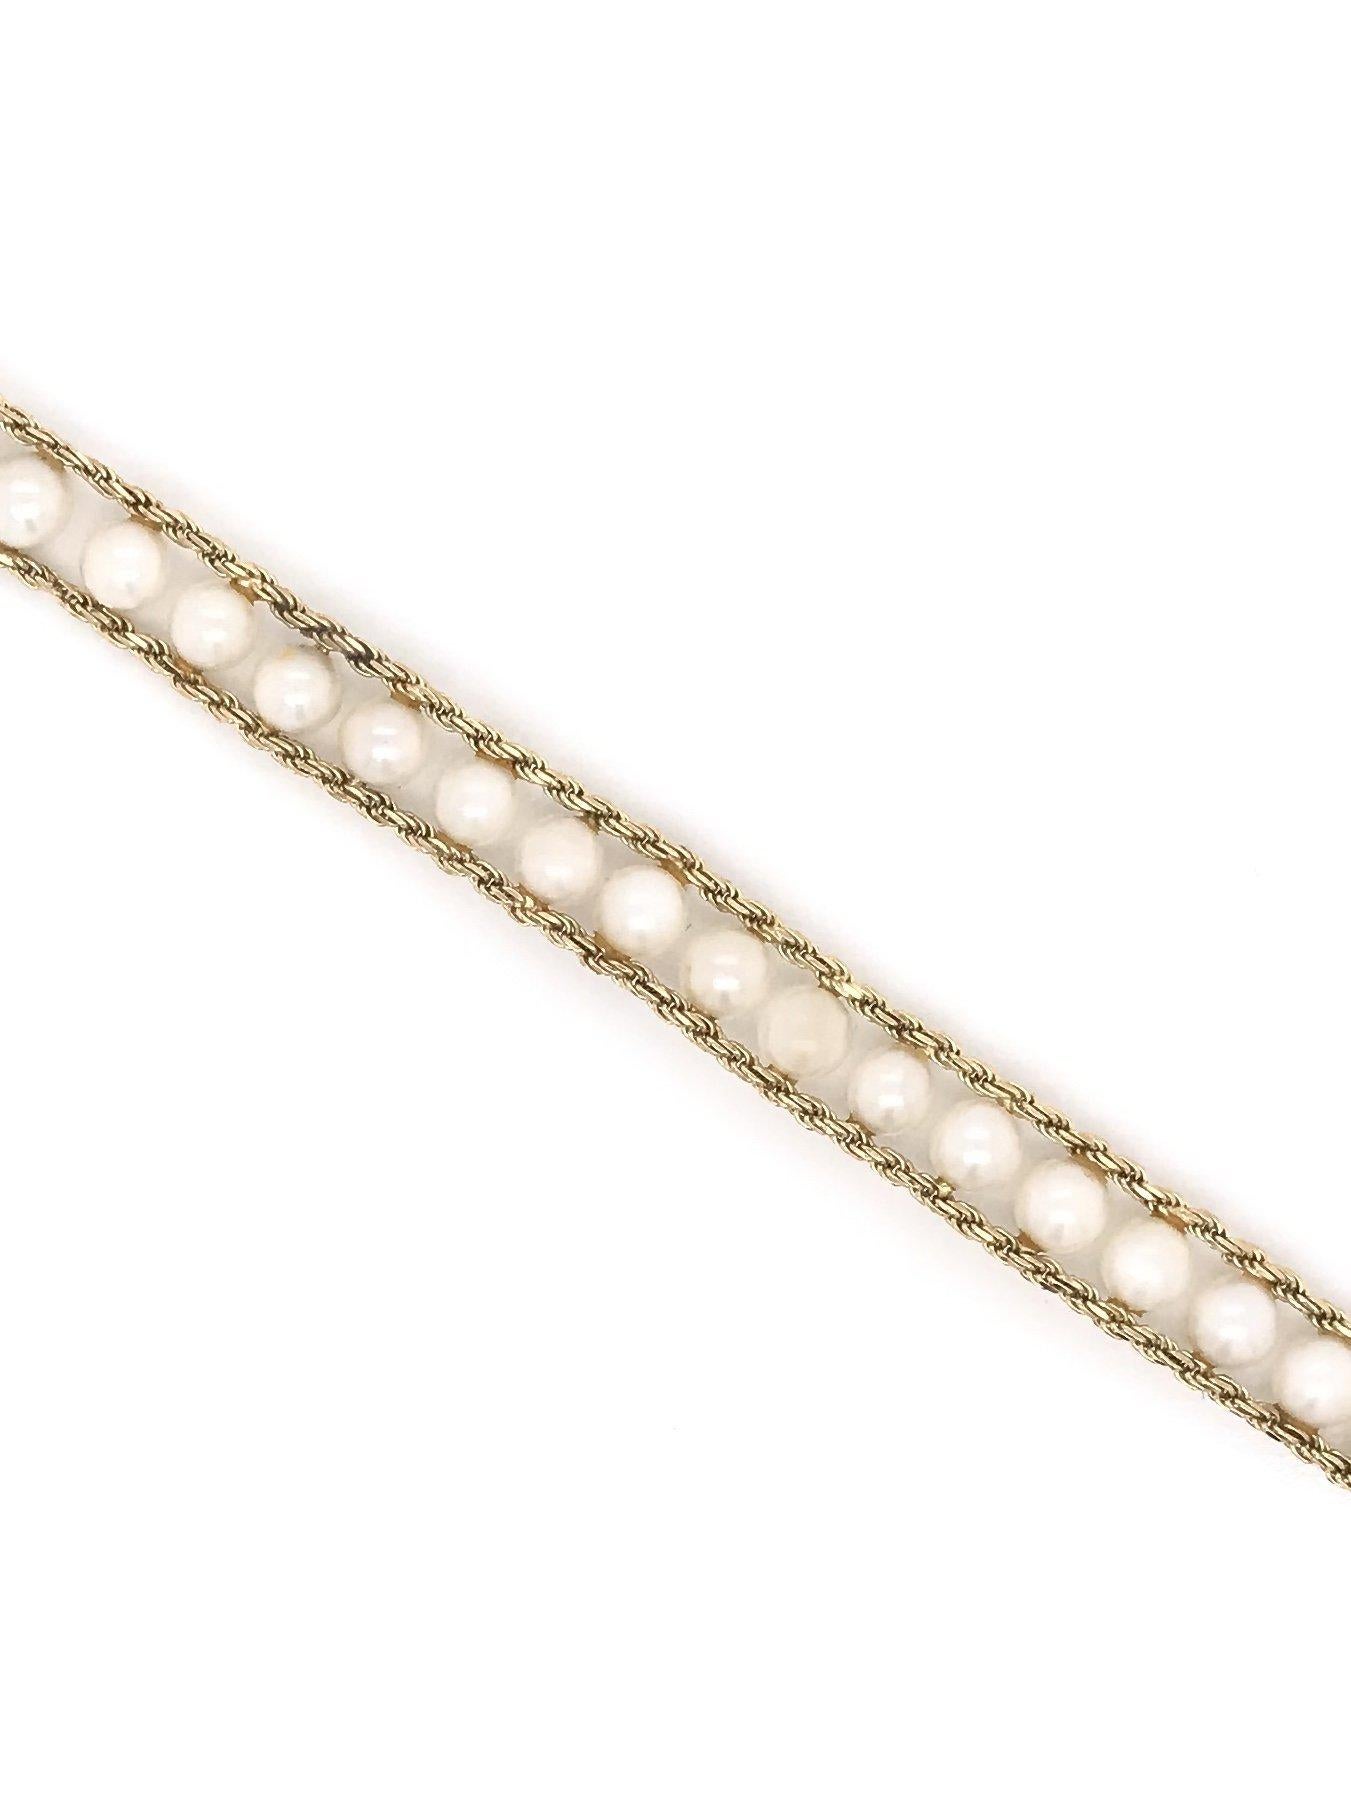 This cultured pearl bracelet was crafted sometime during the Mid Century design period ( 1940-1960 ). This sweet and simple bracelet features 35 small pearls strung between two 14k gold rope chains. The bracelet features an easy to use push button